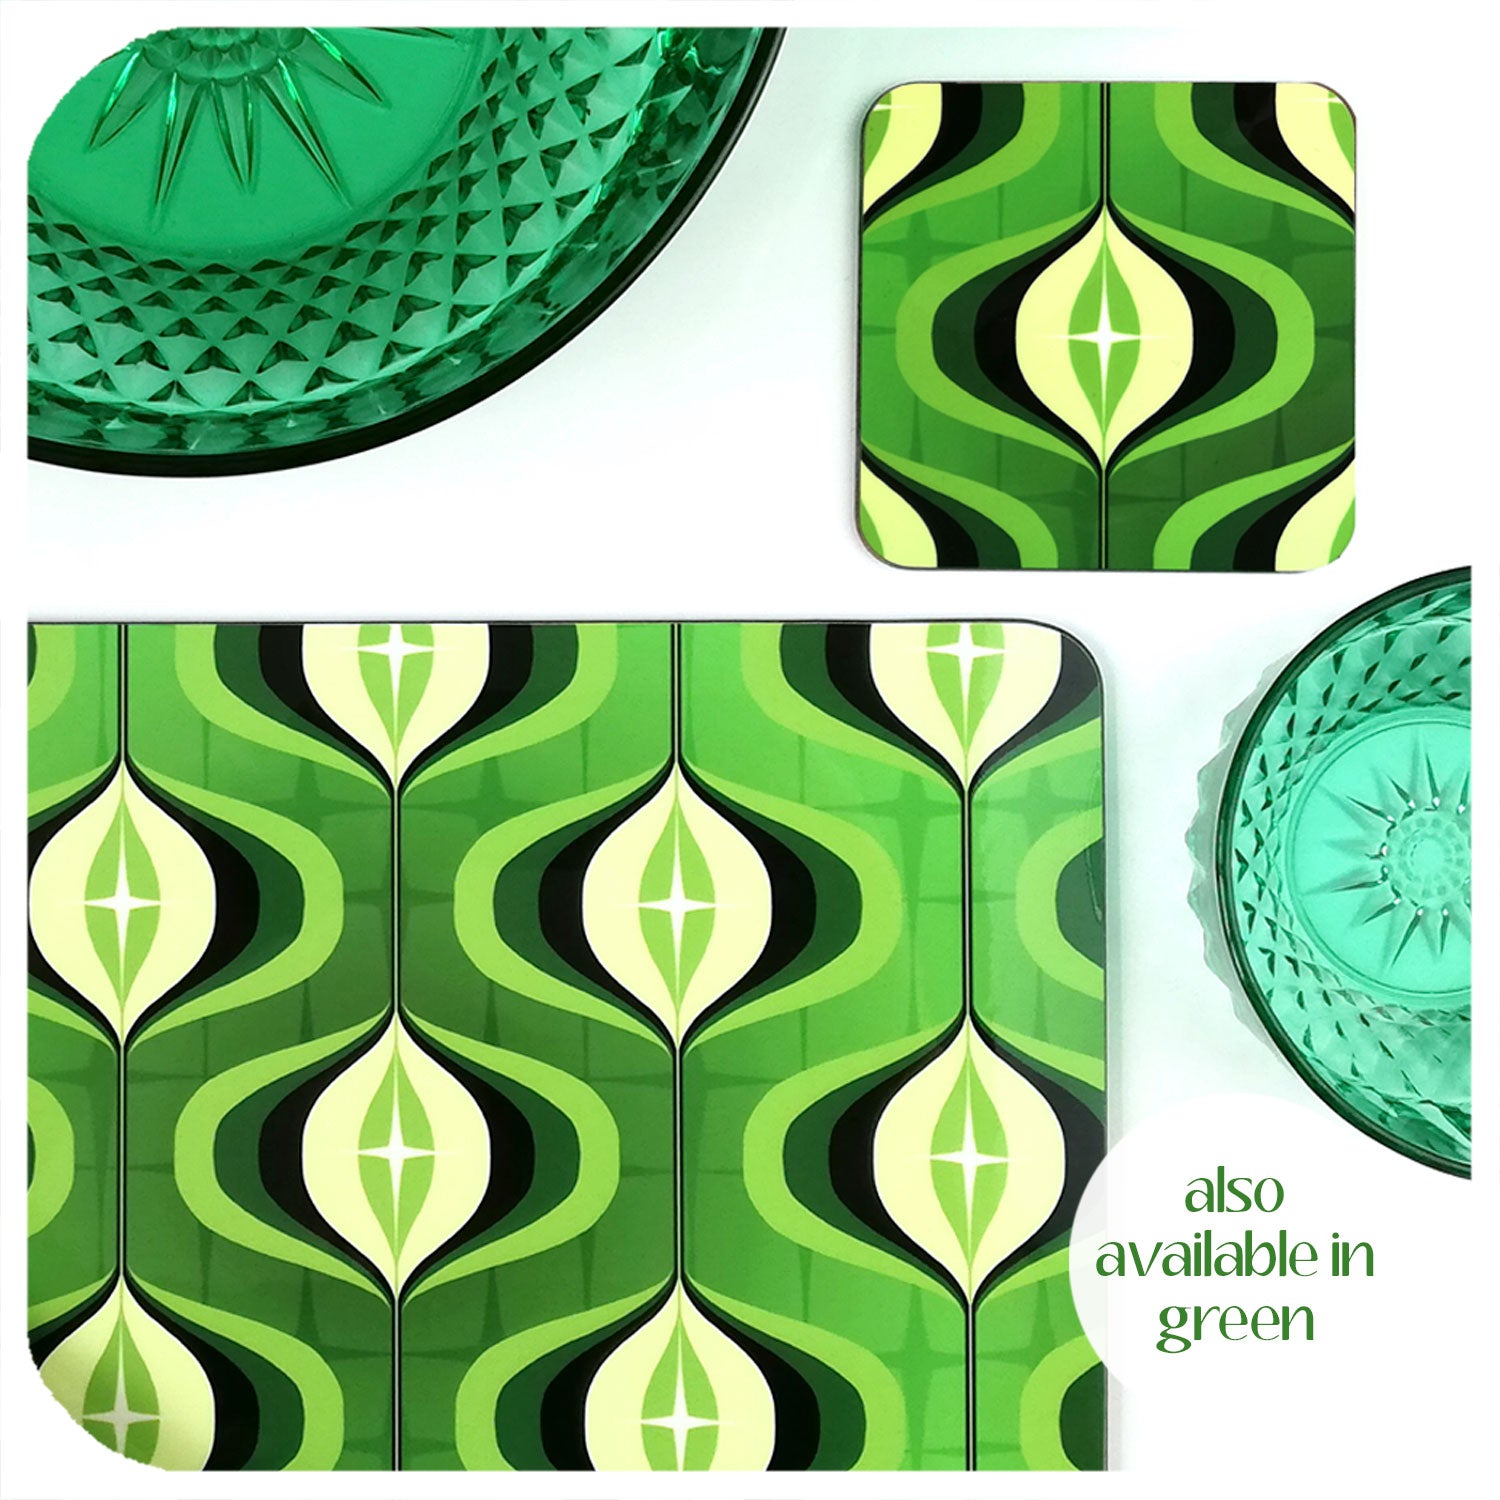 1970s Op Art Tableware also available in green | The Inkabilly Emporium